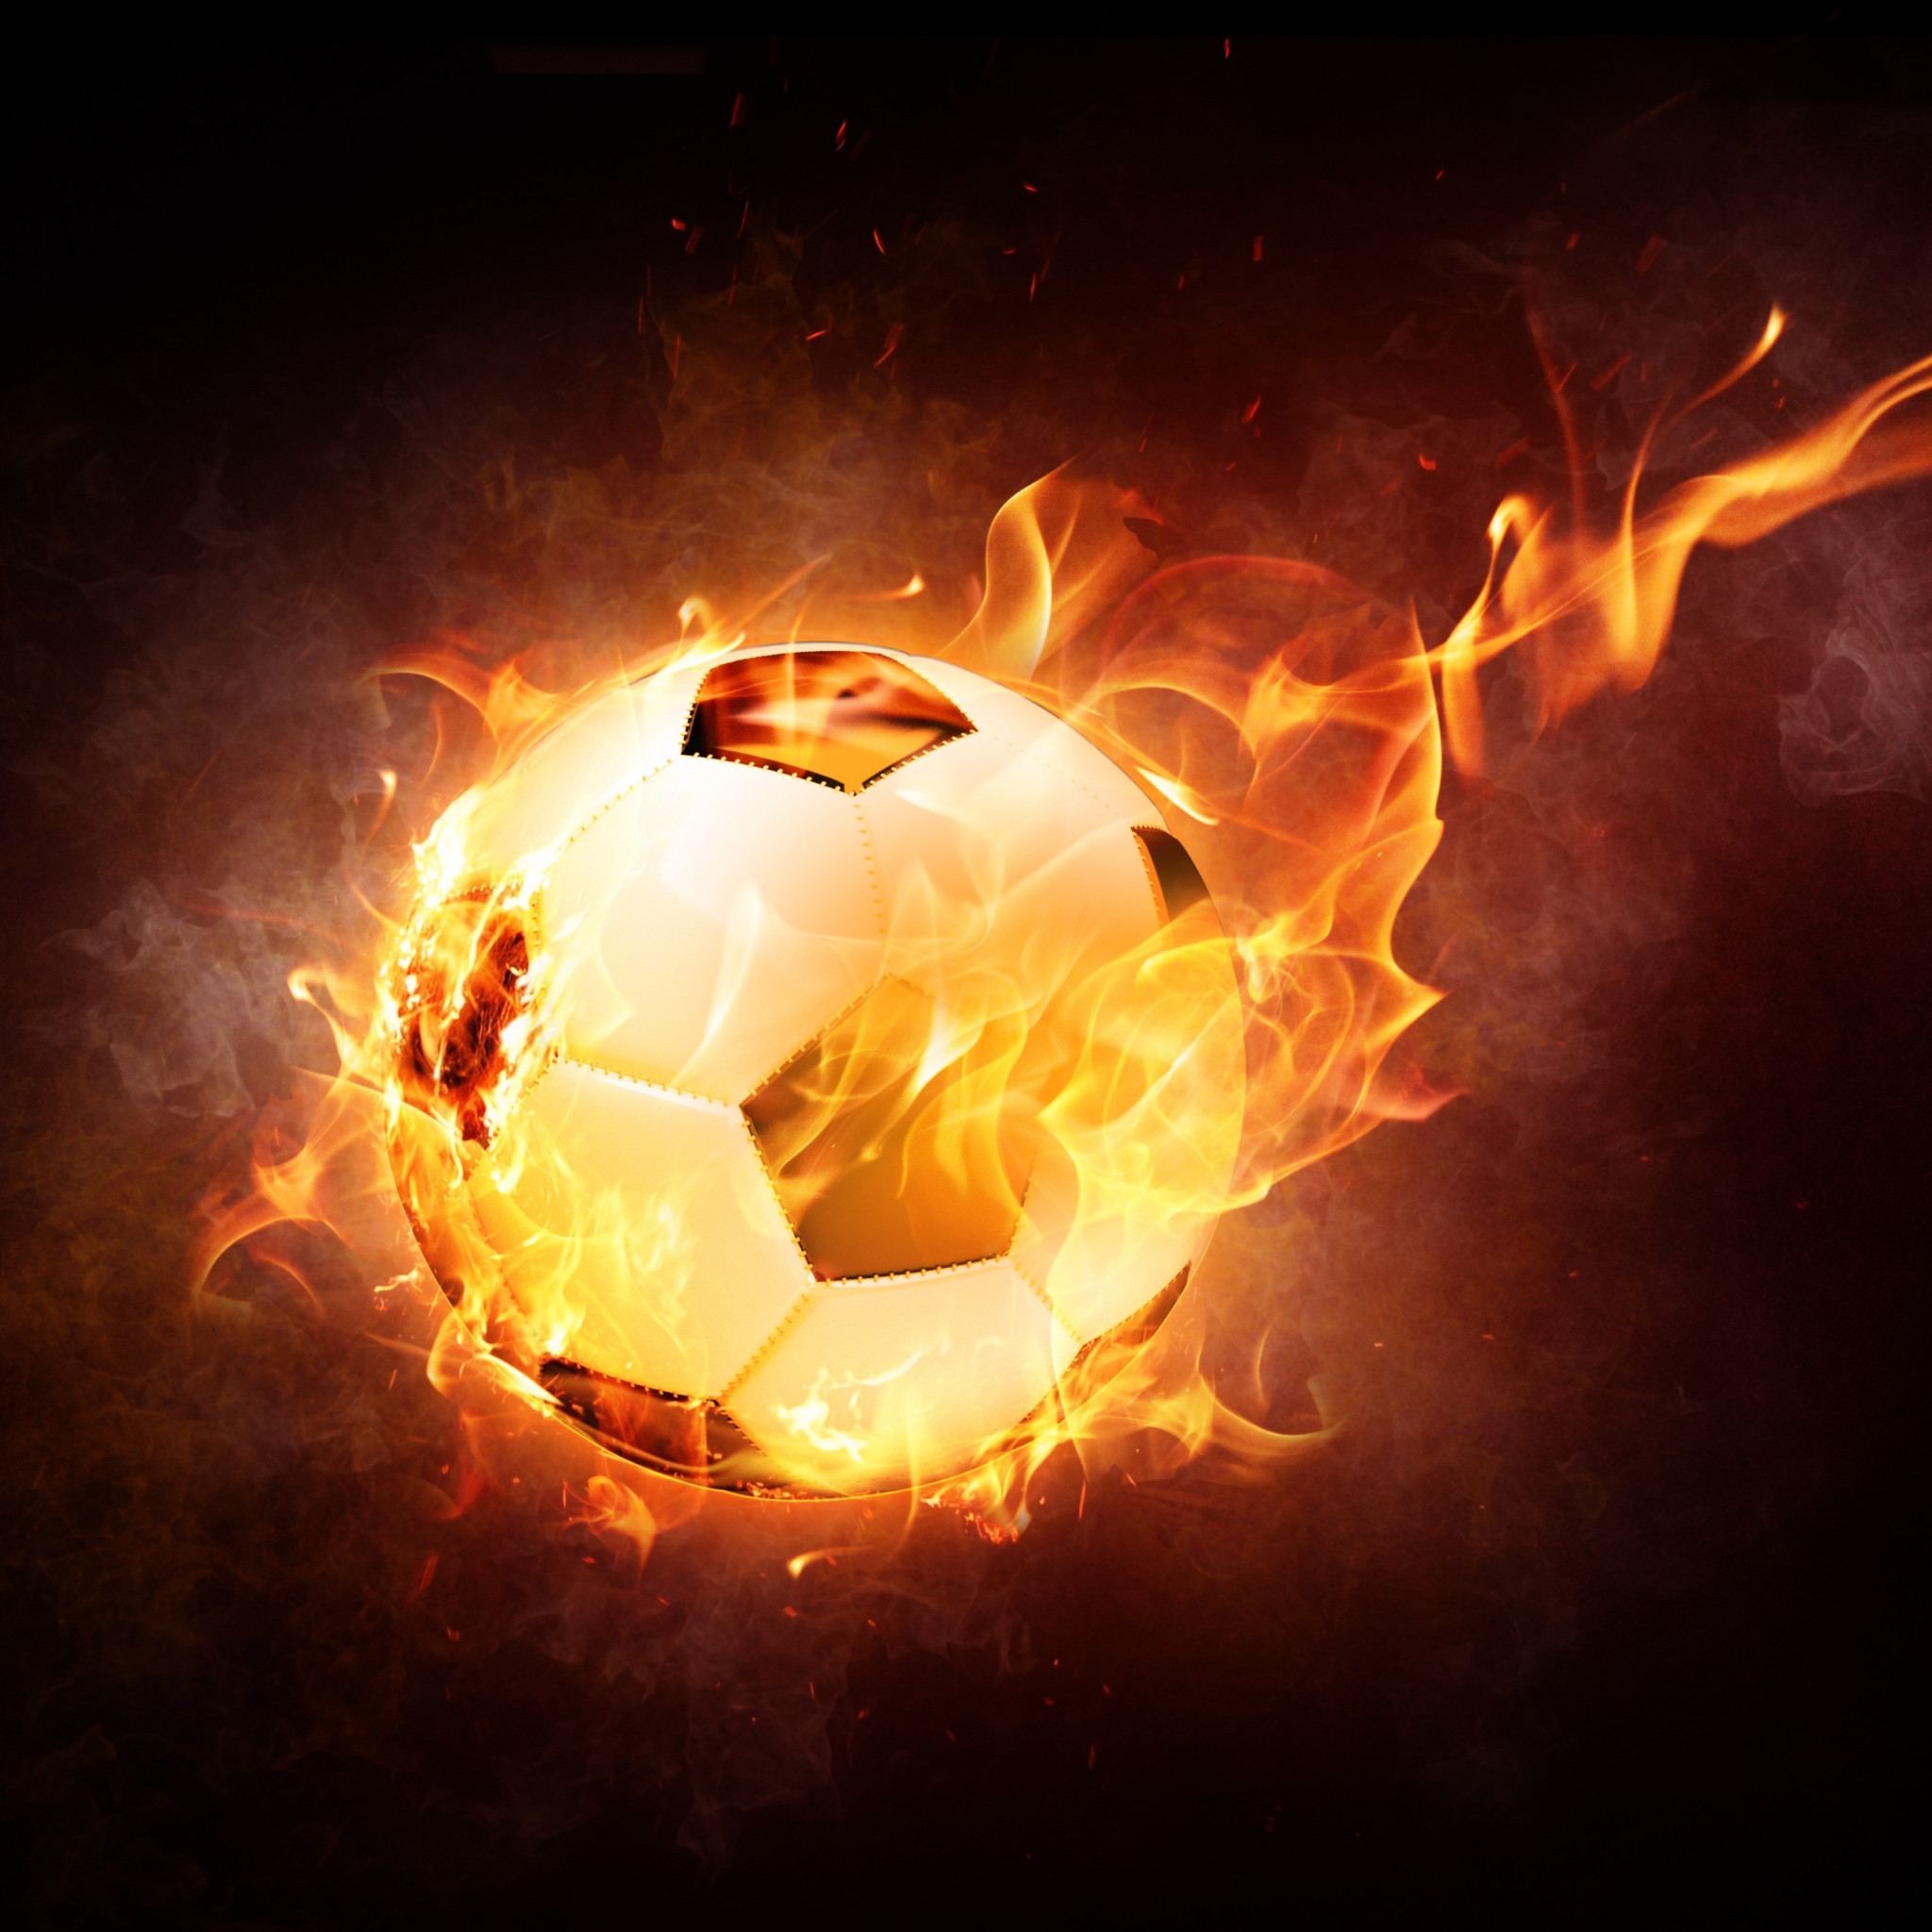 The football ball is on fire wallpaper 2048x2048